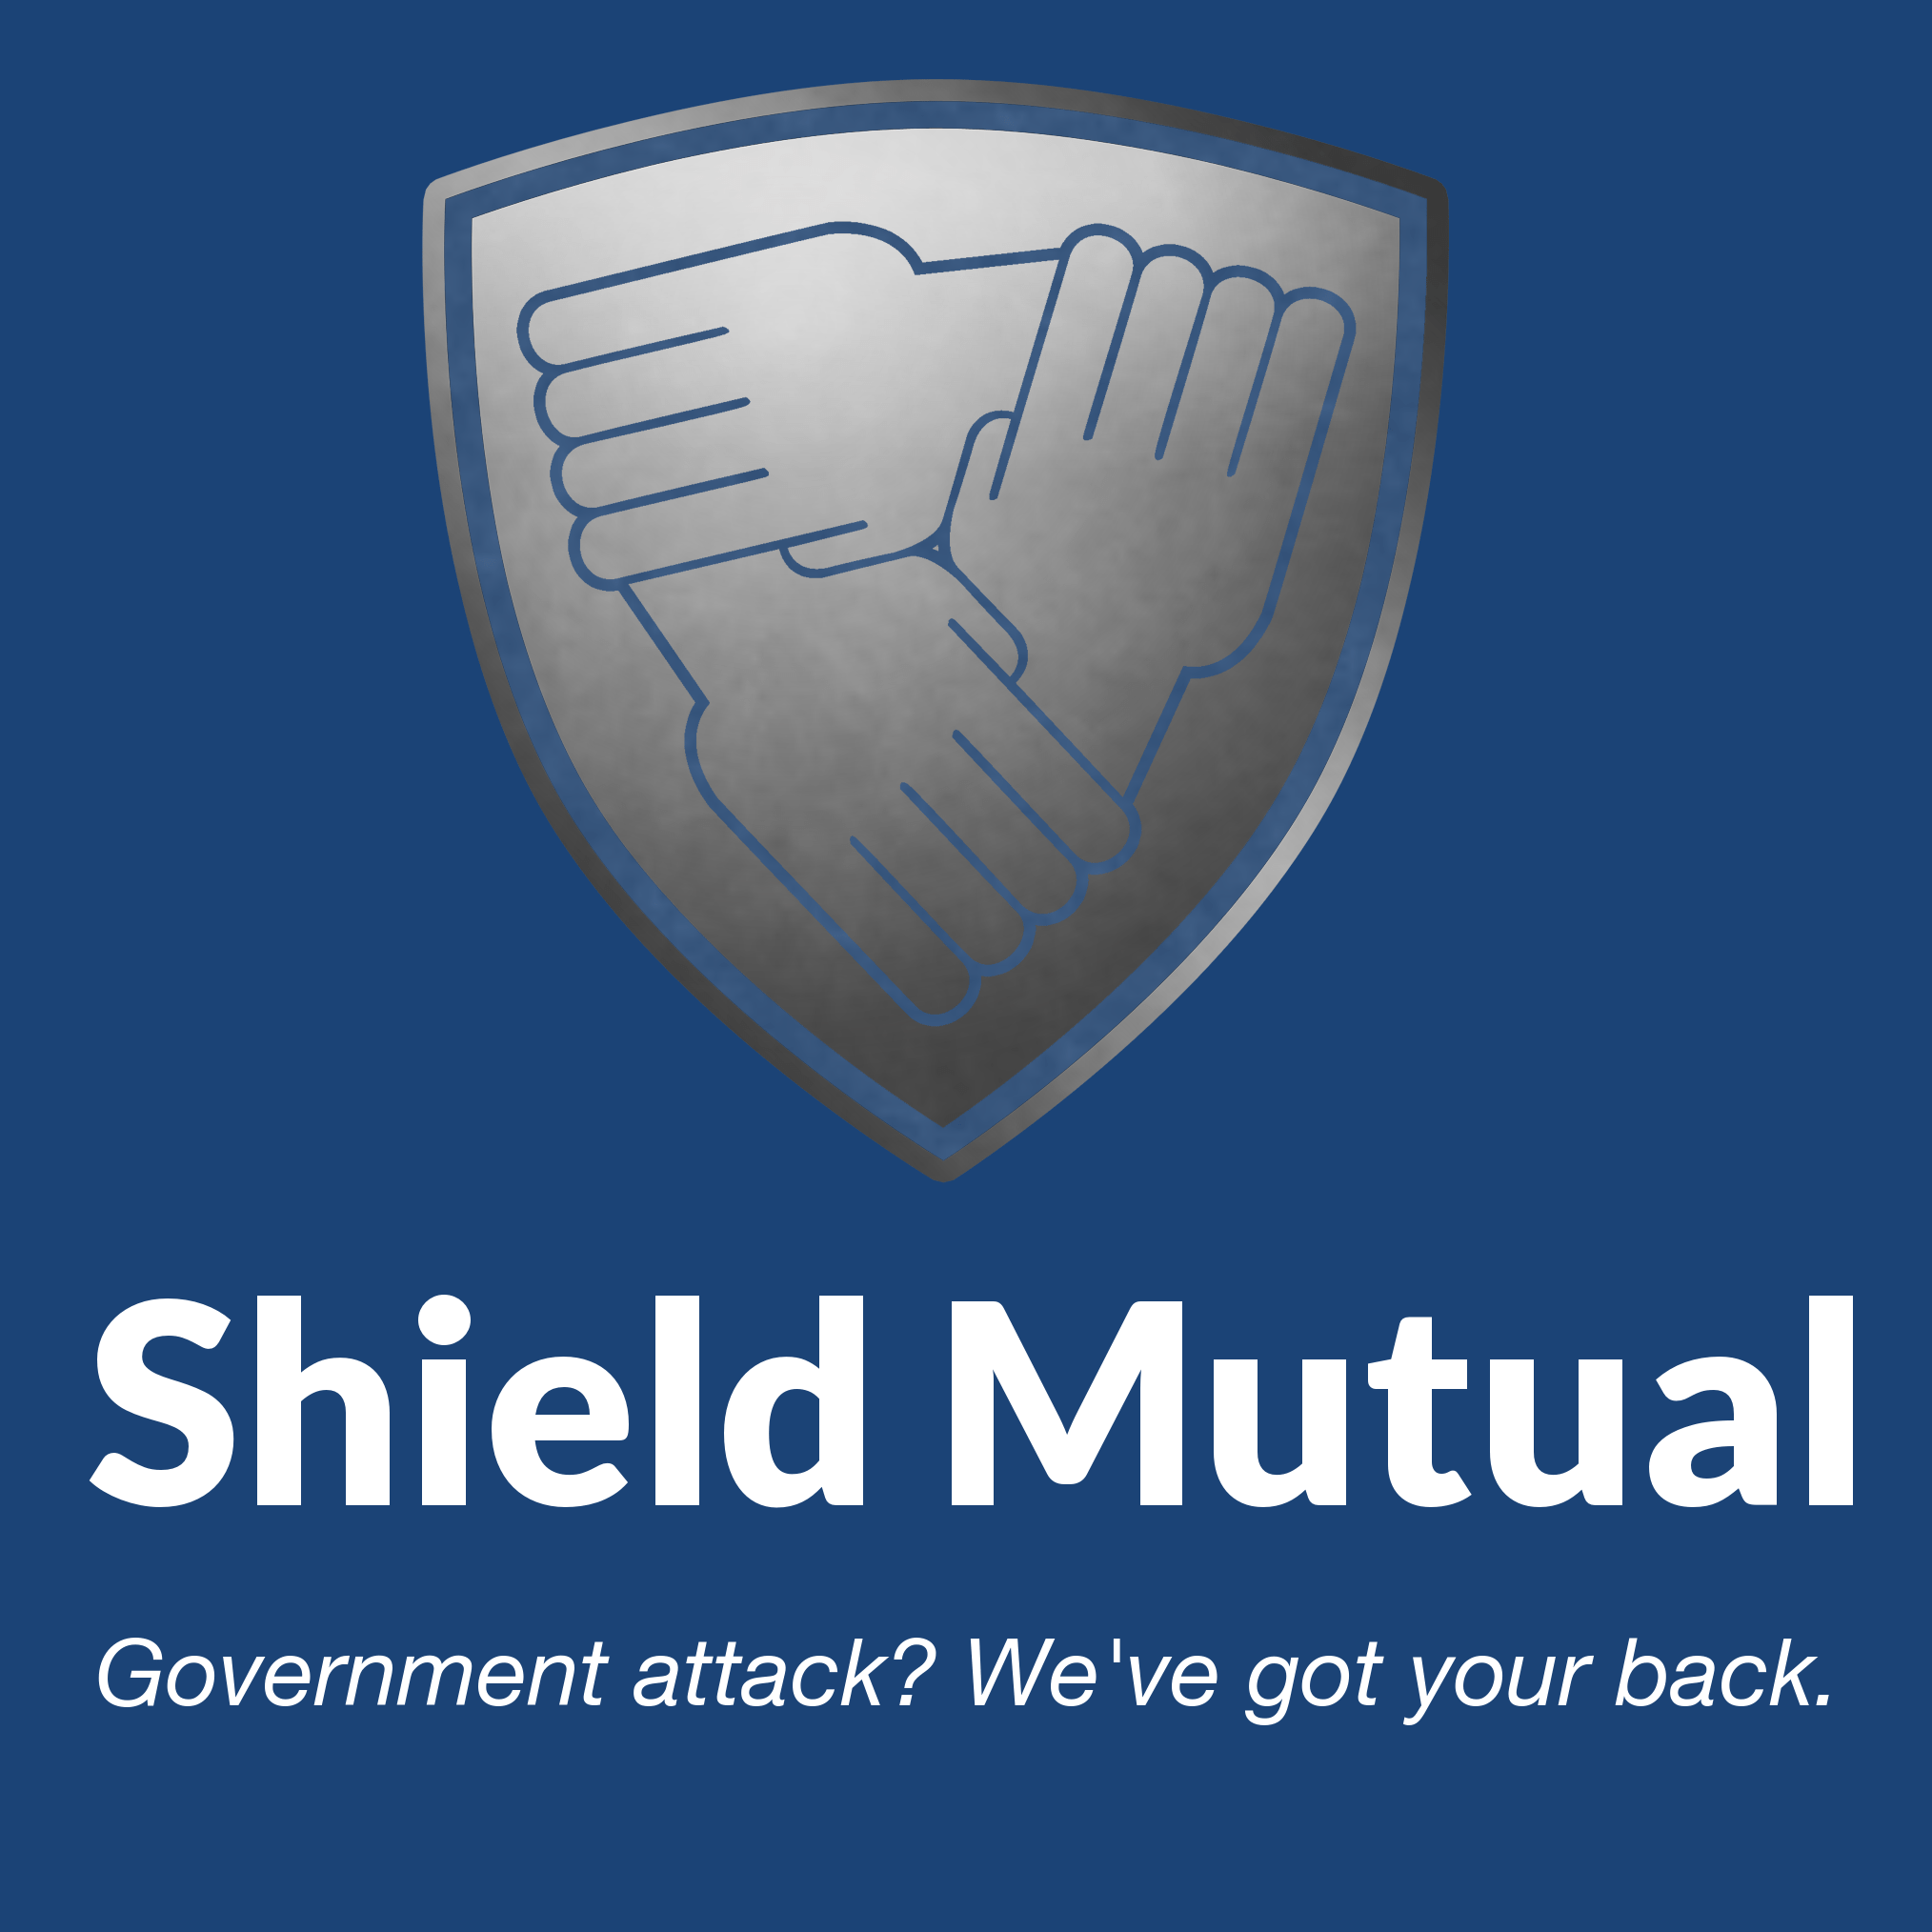 Shield Mutual is the agora's first defense agency.